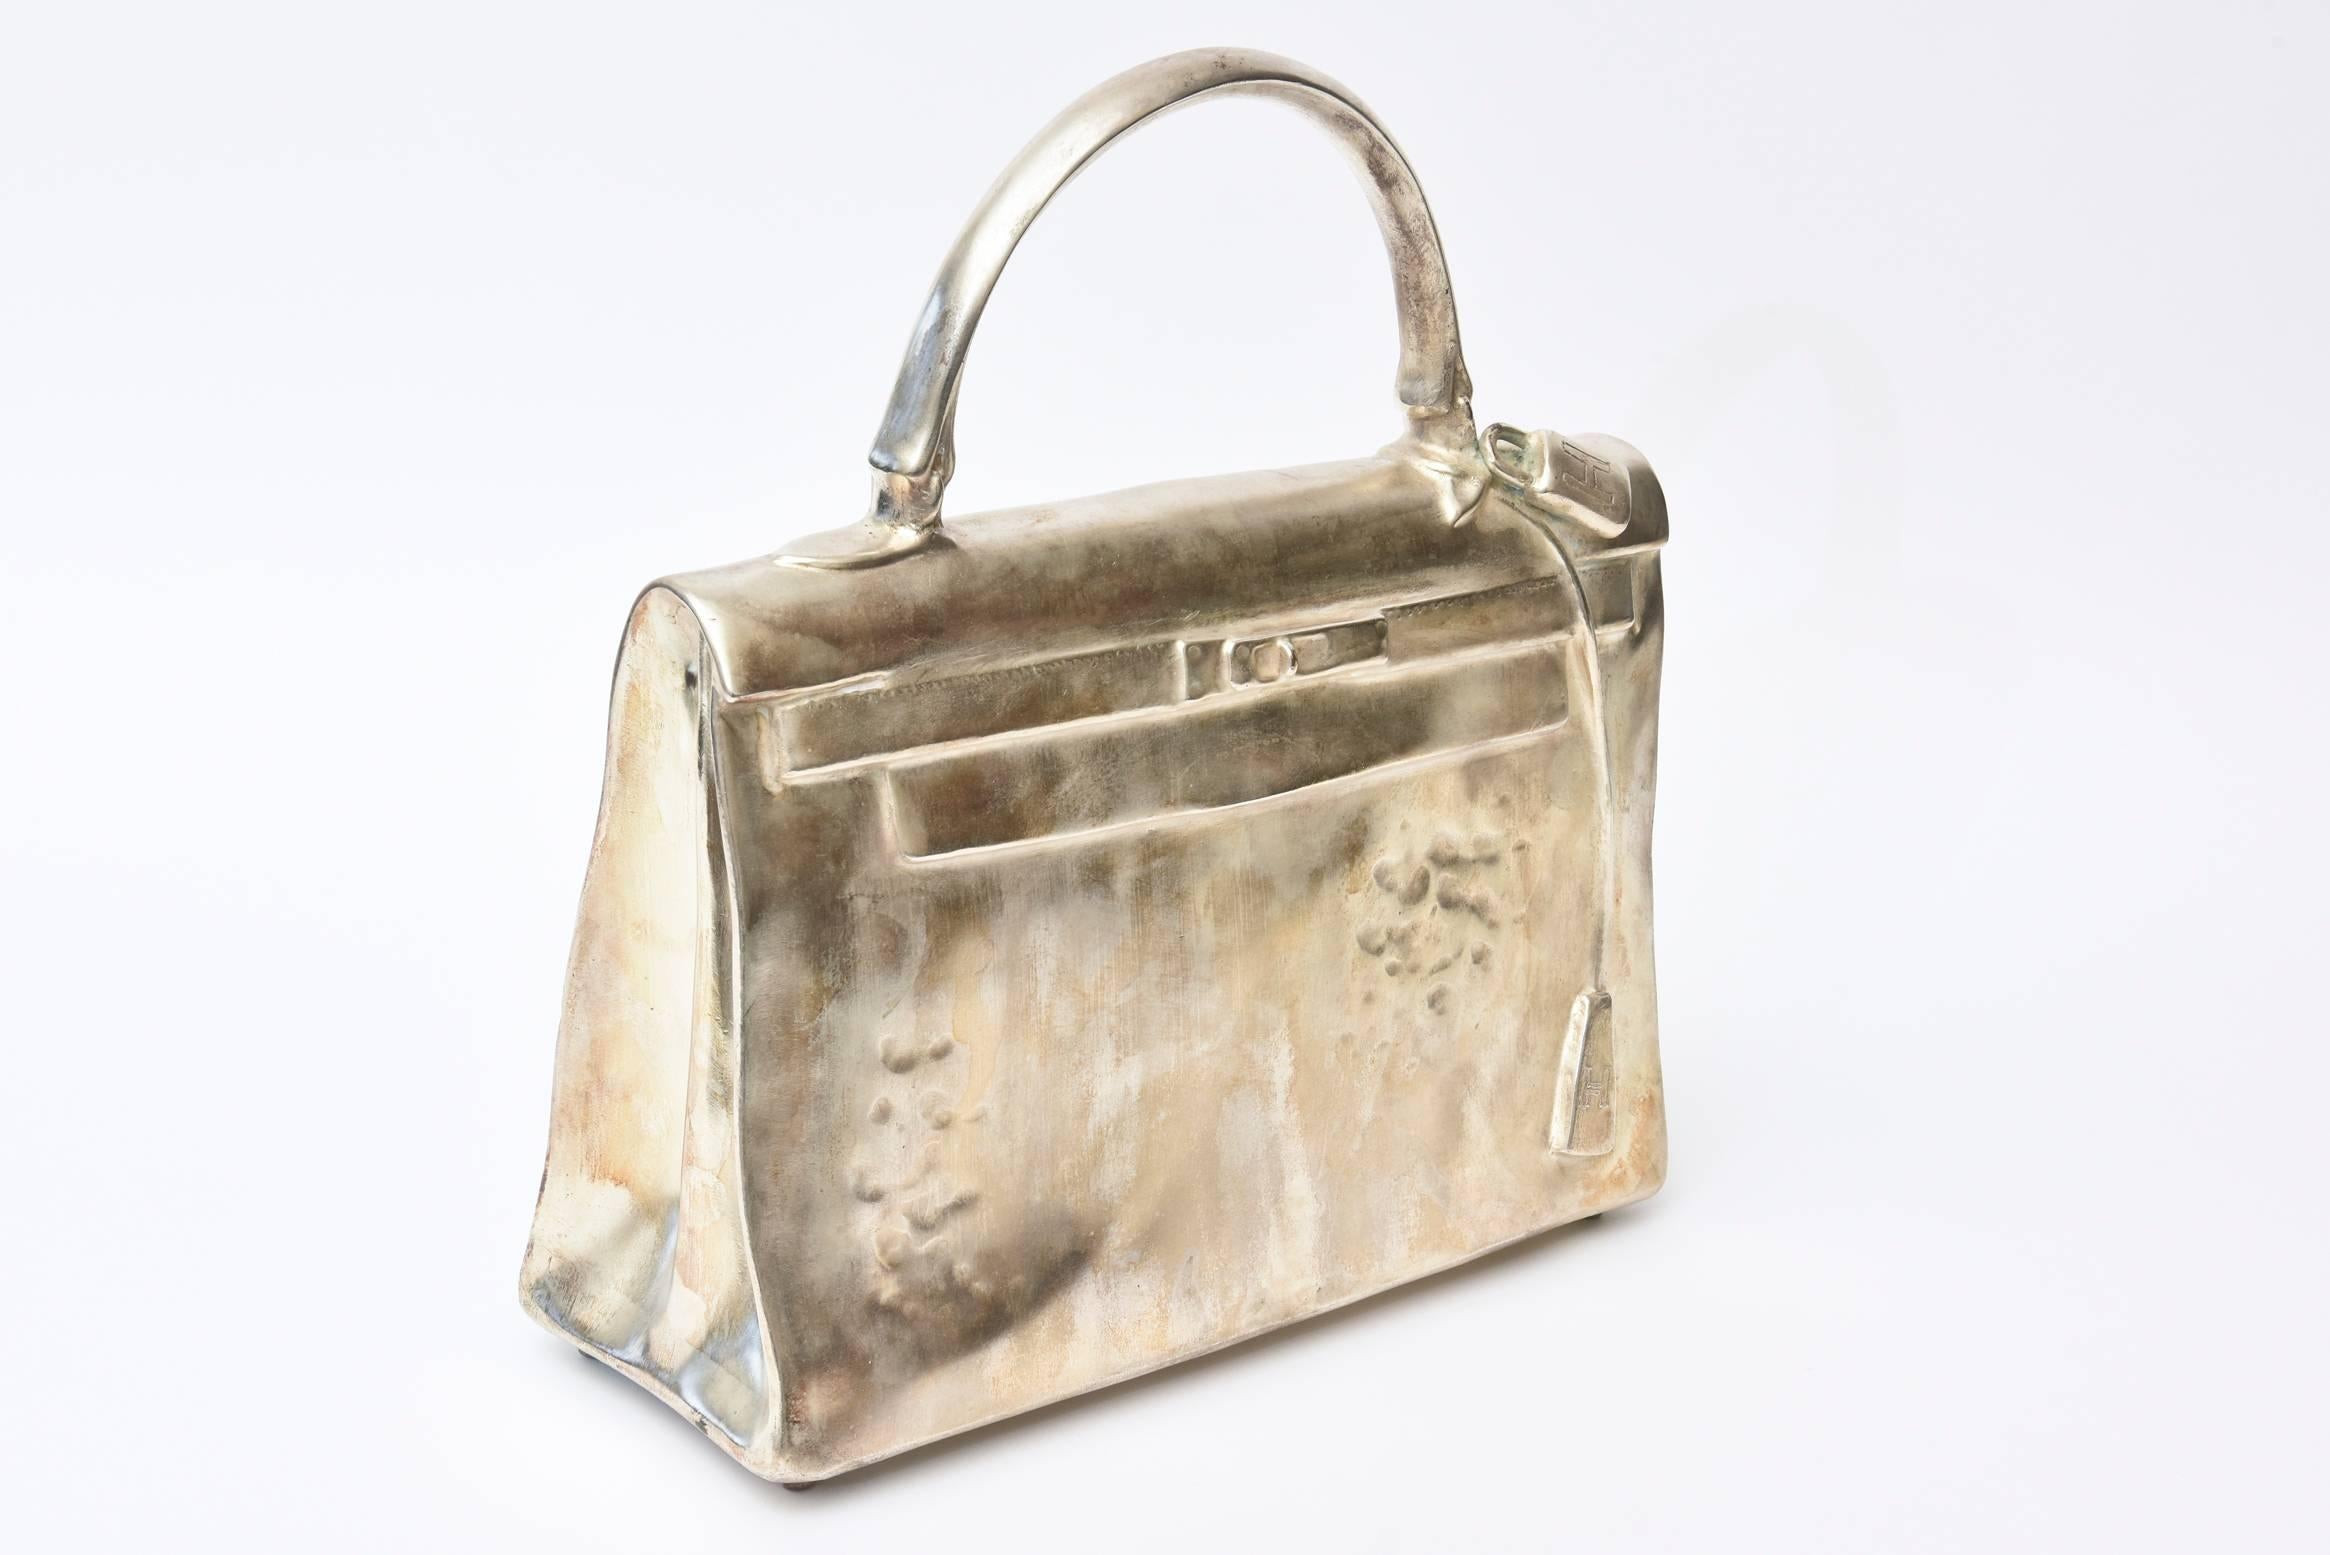 This amazing sculpture by the well known French artist and sculptor, Christian Maas is a silvered bronze life-size rendering of the infamous Hermes Kelly Birkin bag. It was a limited edition of 100. It was done in 1990. It is titled the 